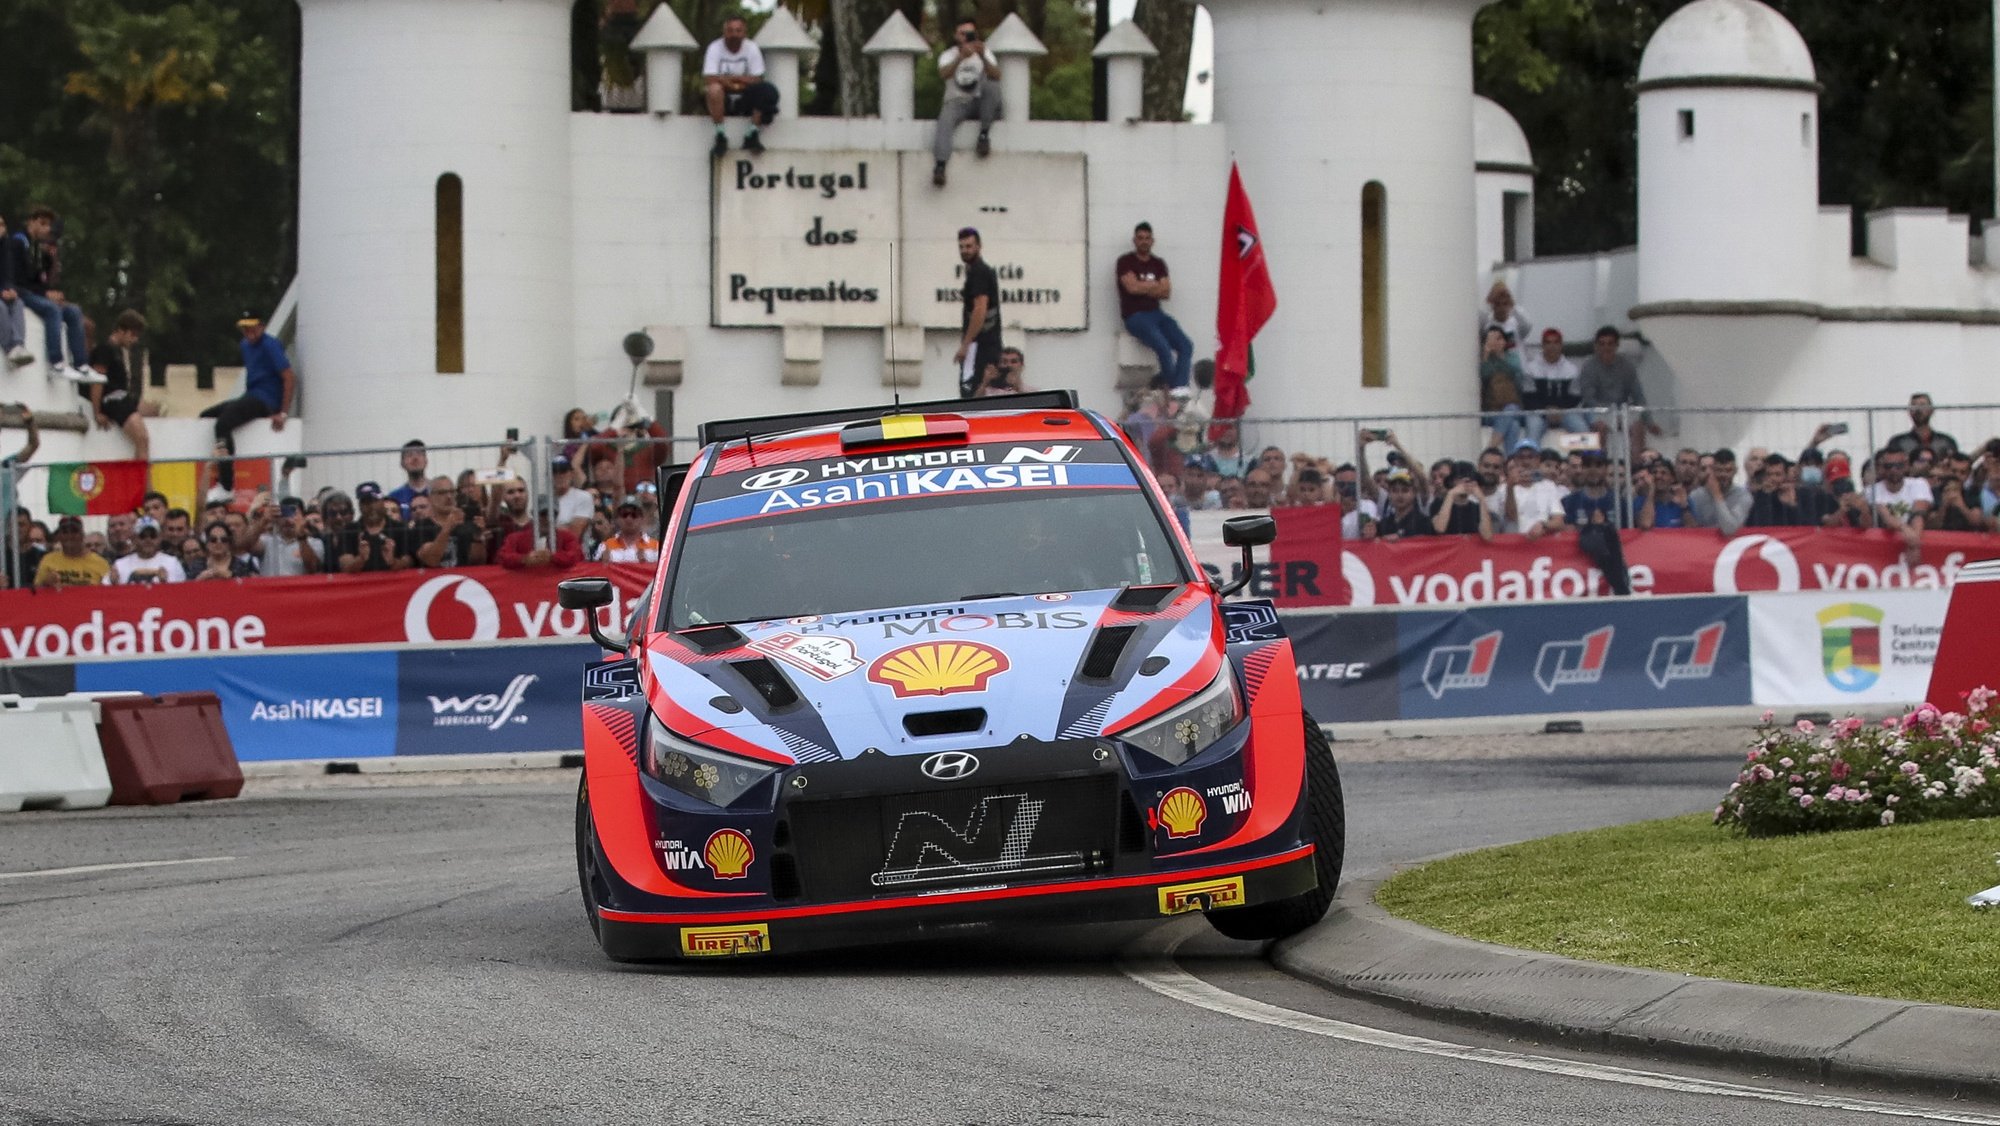 Thierry Neuville of Belgium drives his Hyundai i20 N Rally 1 during the SS1 of the Rally Portugal 2022 as part of the World Rally Championship (WRC), in Coimbra, Portugal, 19 May 2022. PAULO NOVAIS/LUSA